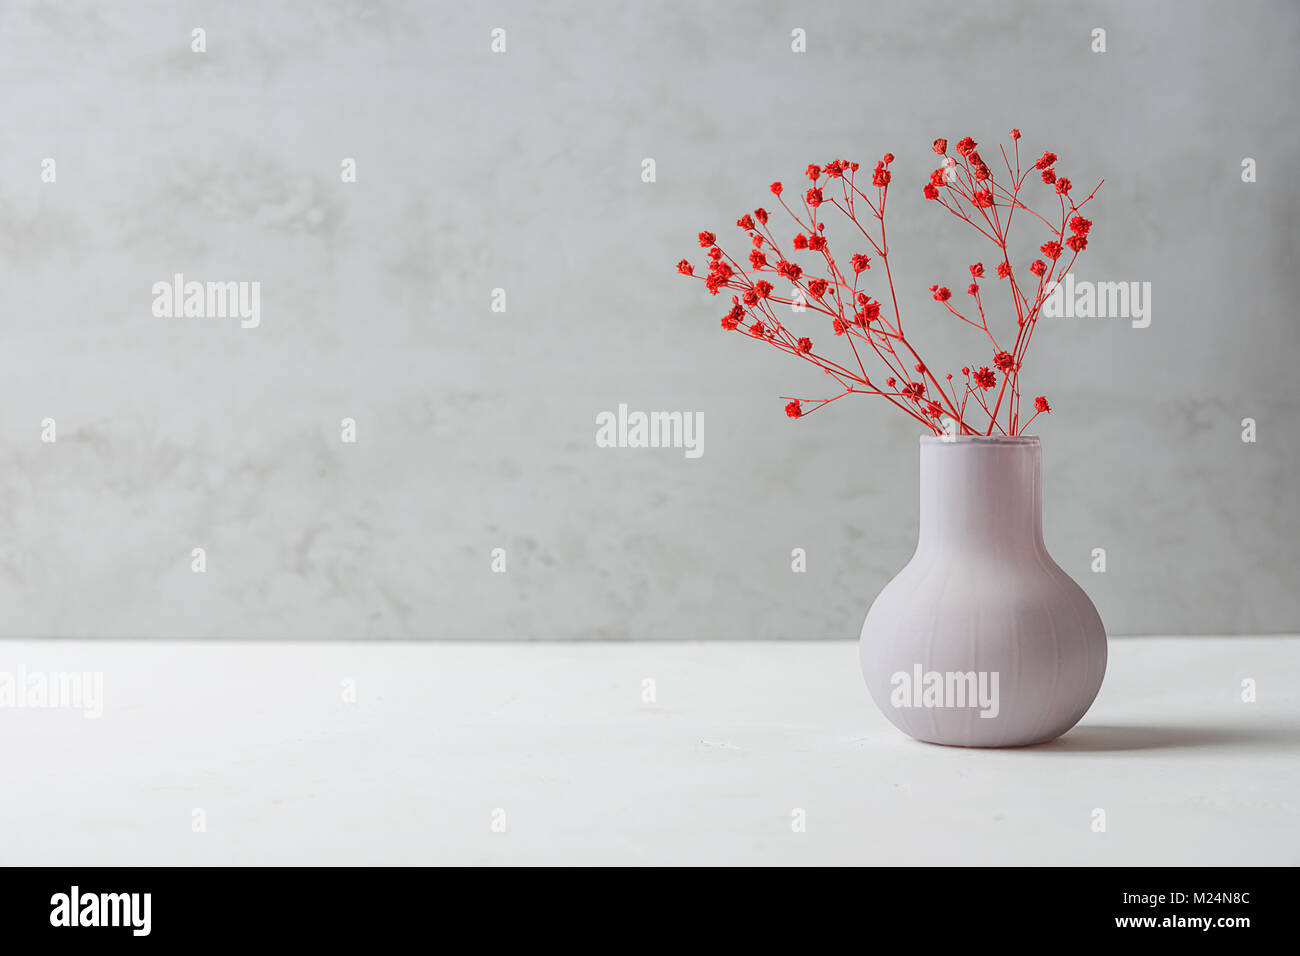 Small Bouquet of Red Flowers in Vintage Vase on White Table Grey Cement Wall Background. Styled Stock Image Mockup for Text Artwork Quotes Lettering W Stock Photo